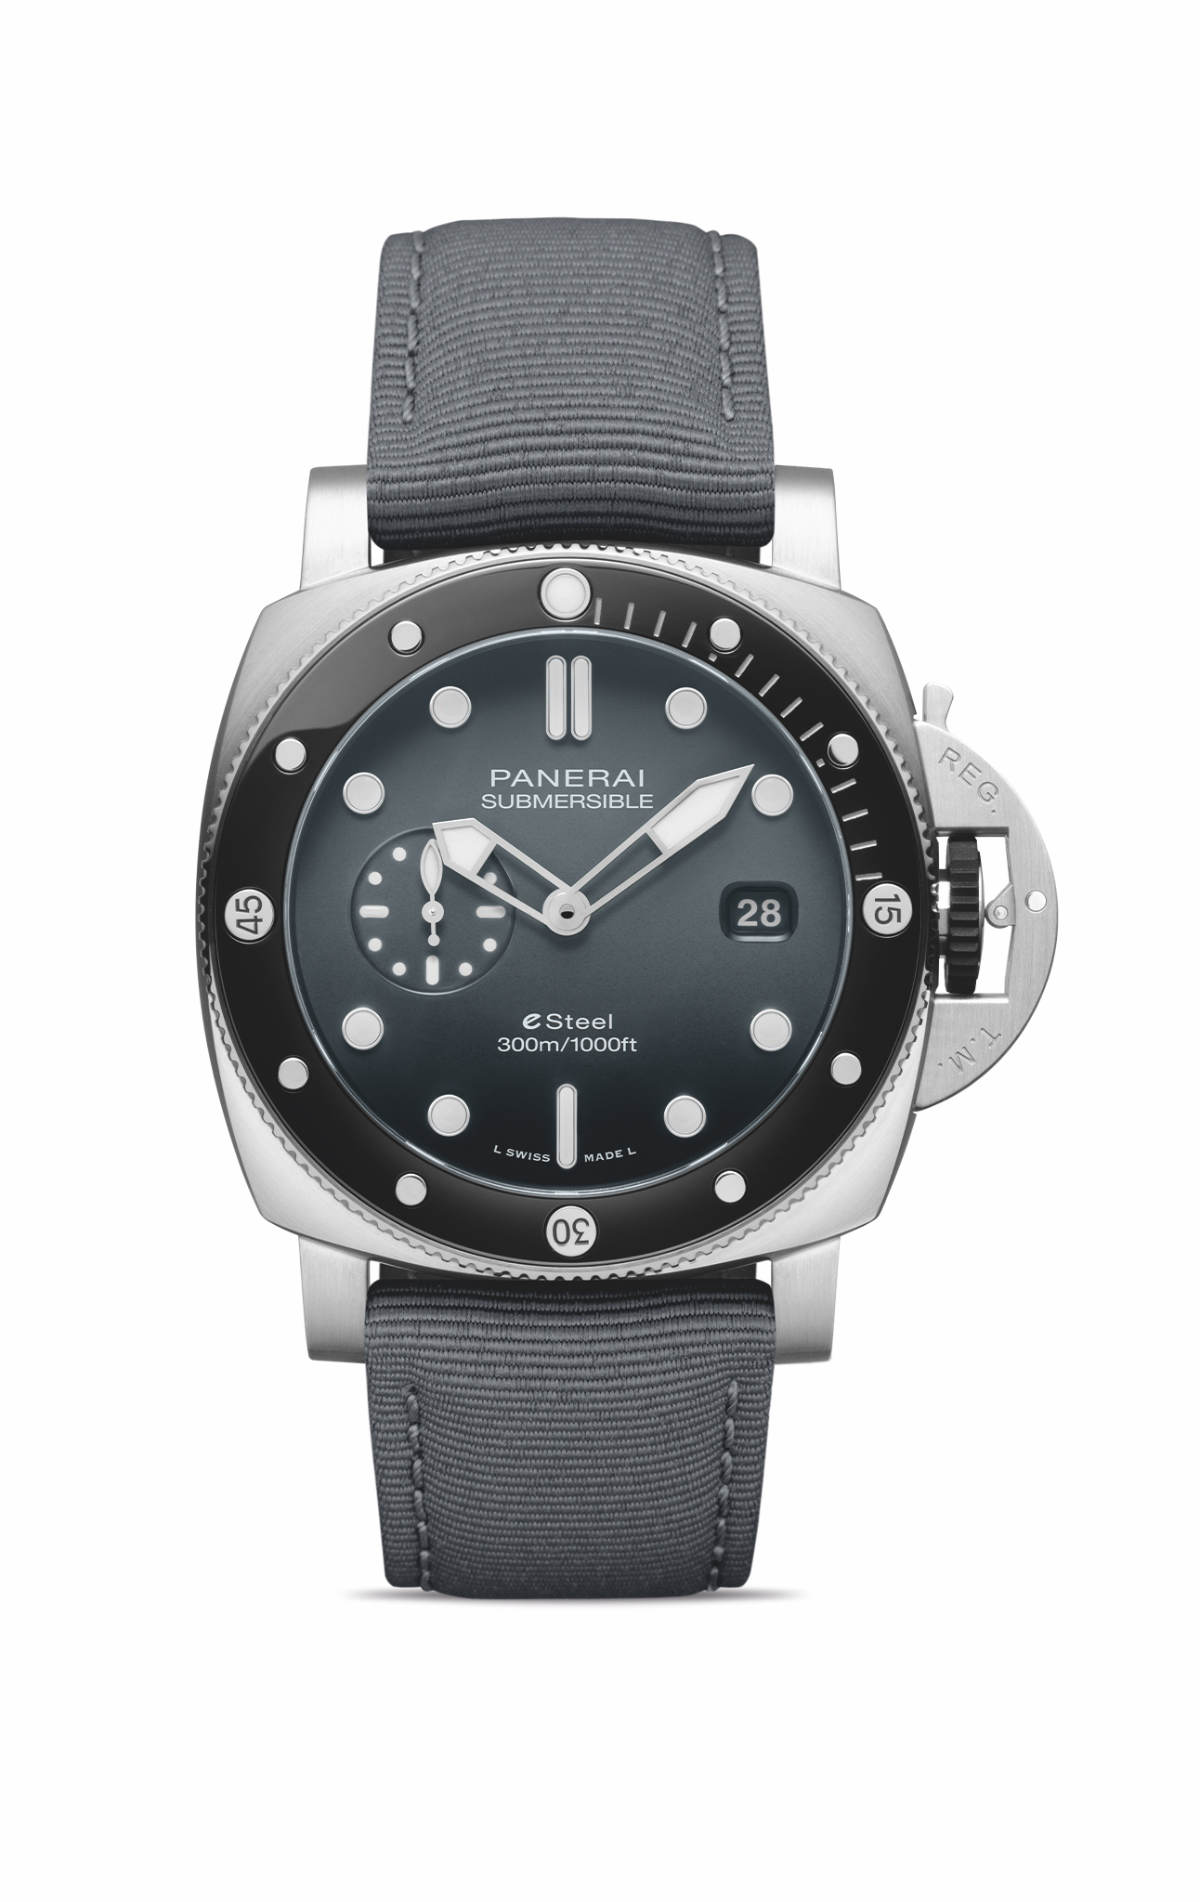 Panerai's Material Progress: eSteel™ Joins The Submersible Collection